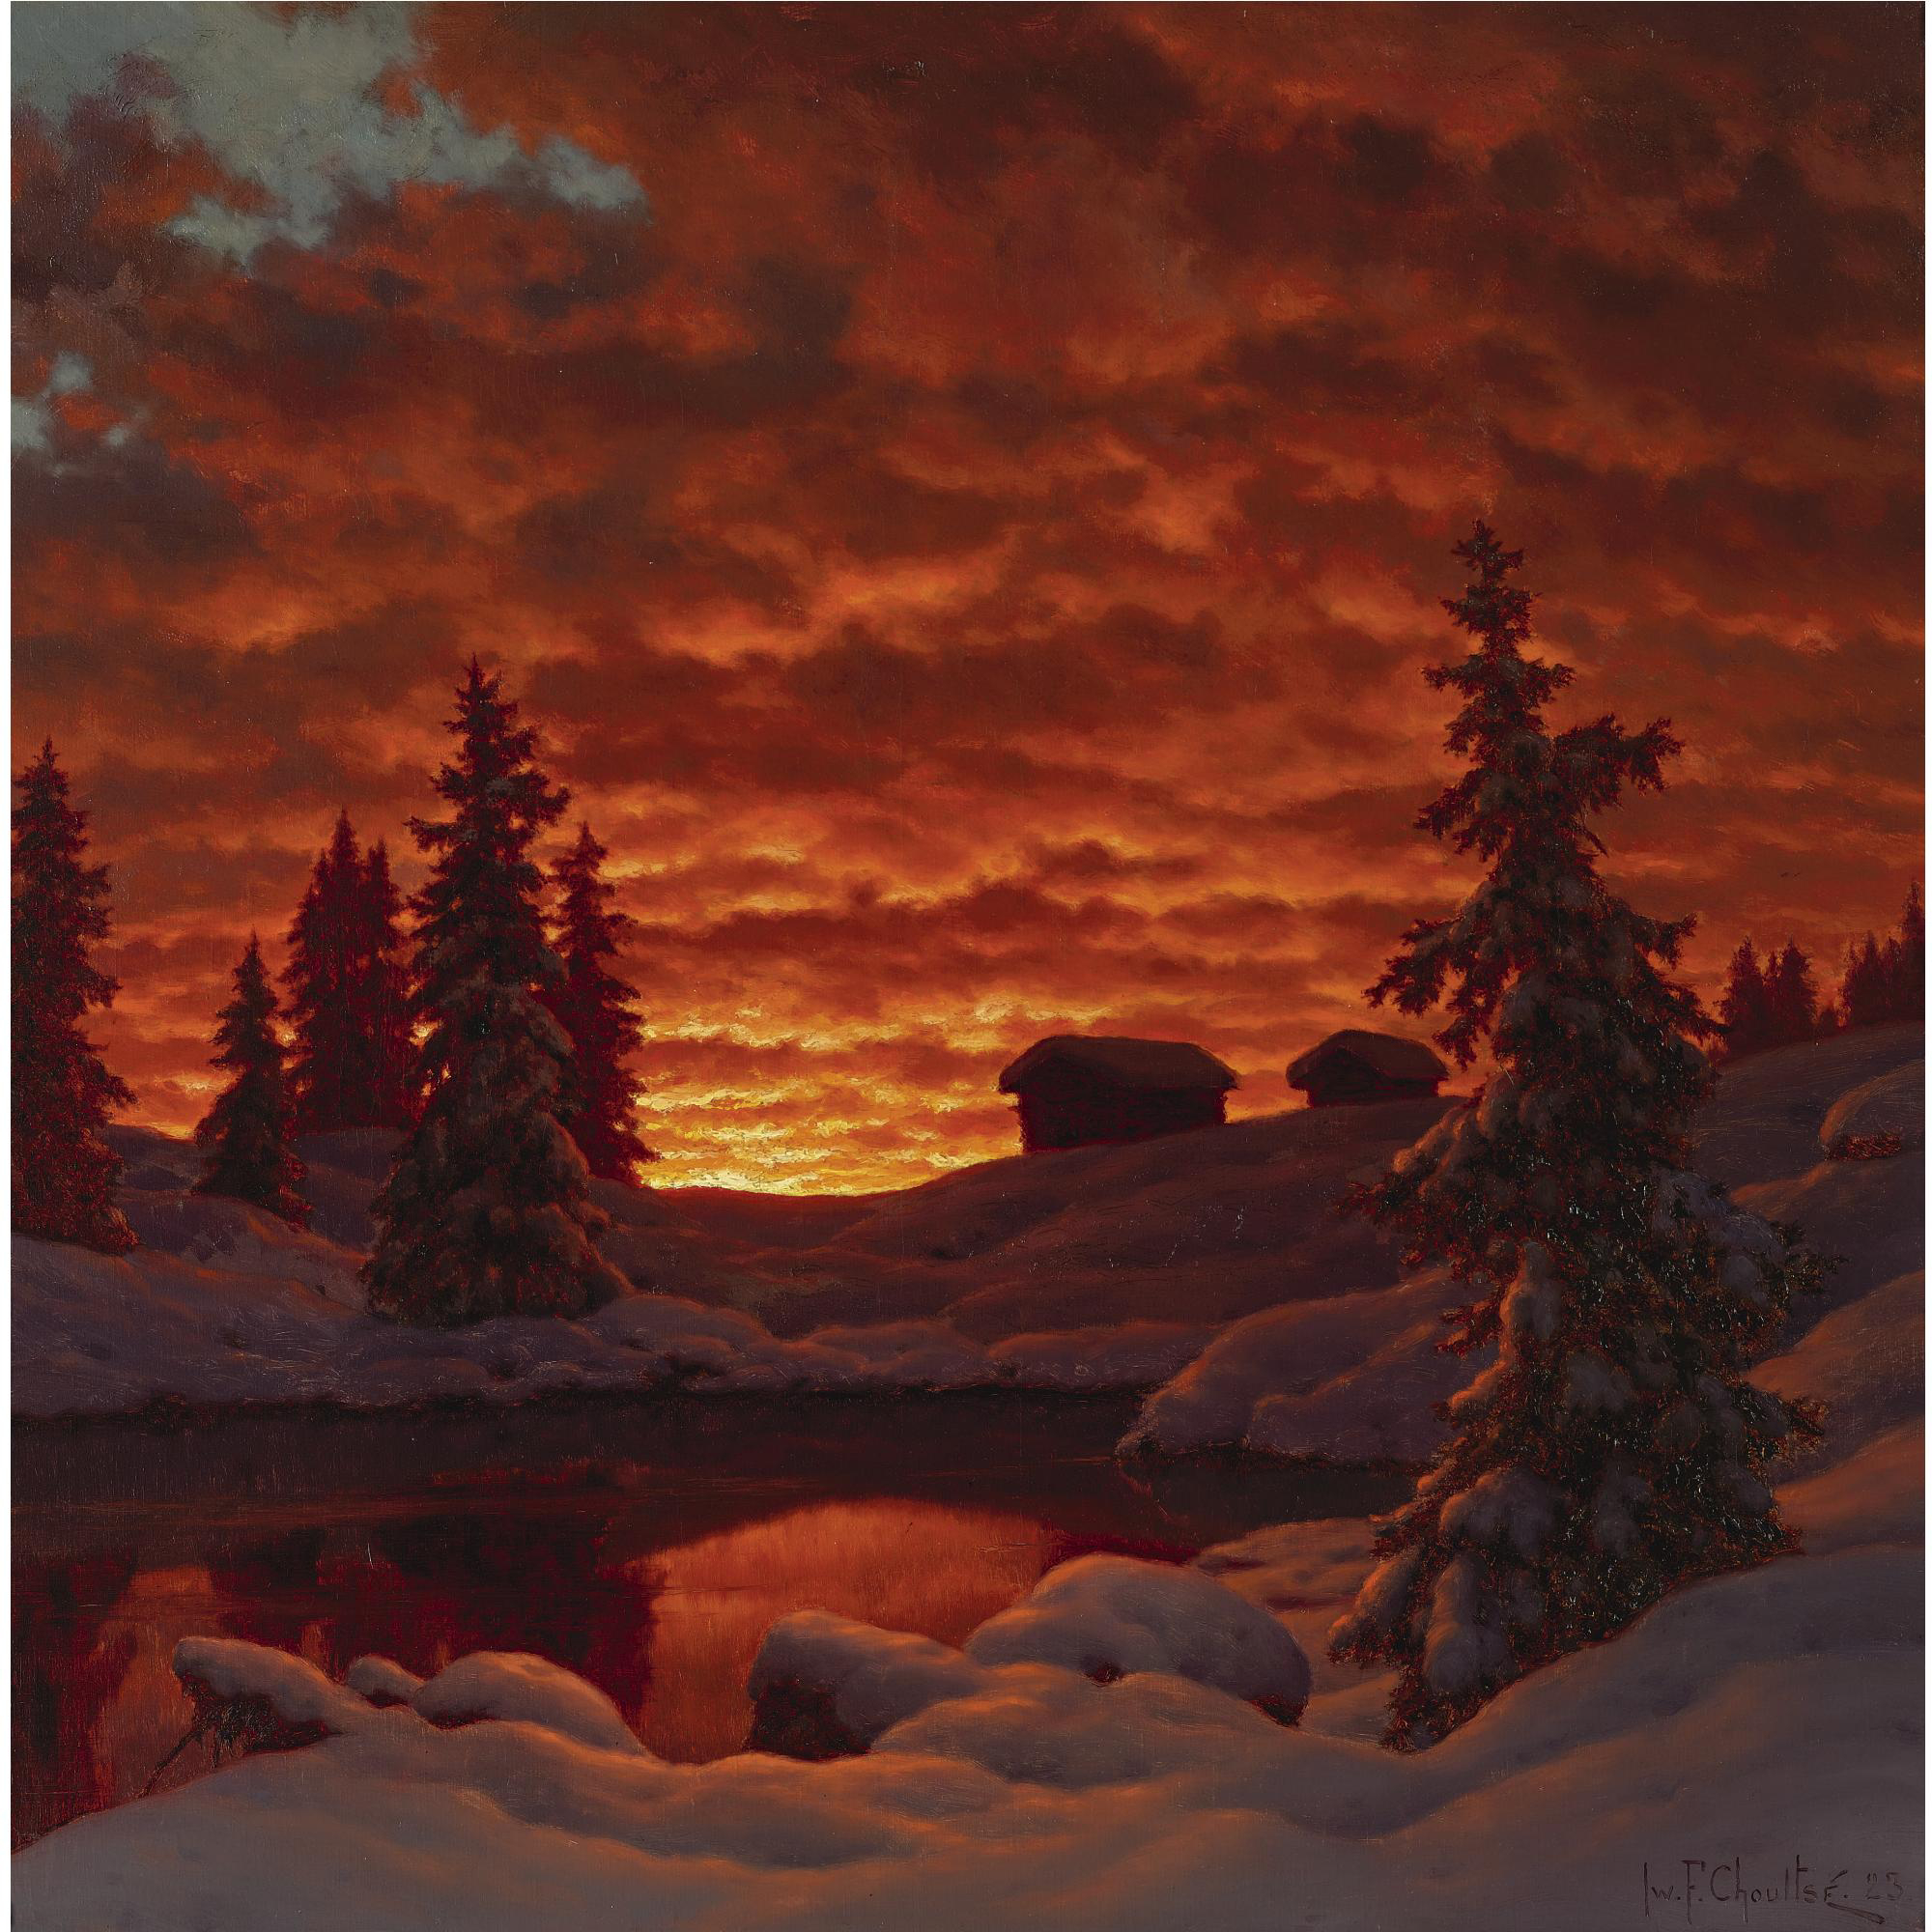 Russian Sunset by Ivan Fedorovich Choultsé - 1923 - 55.2 x 69.8 cm private collection